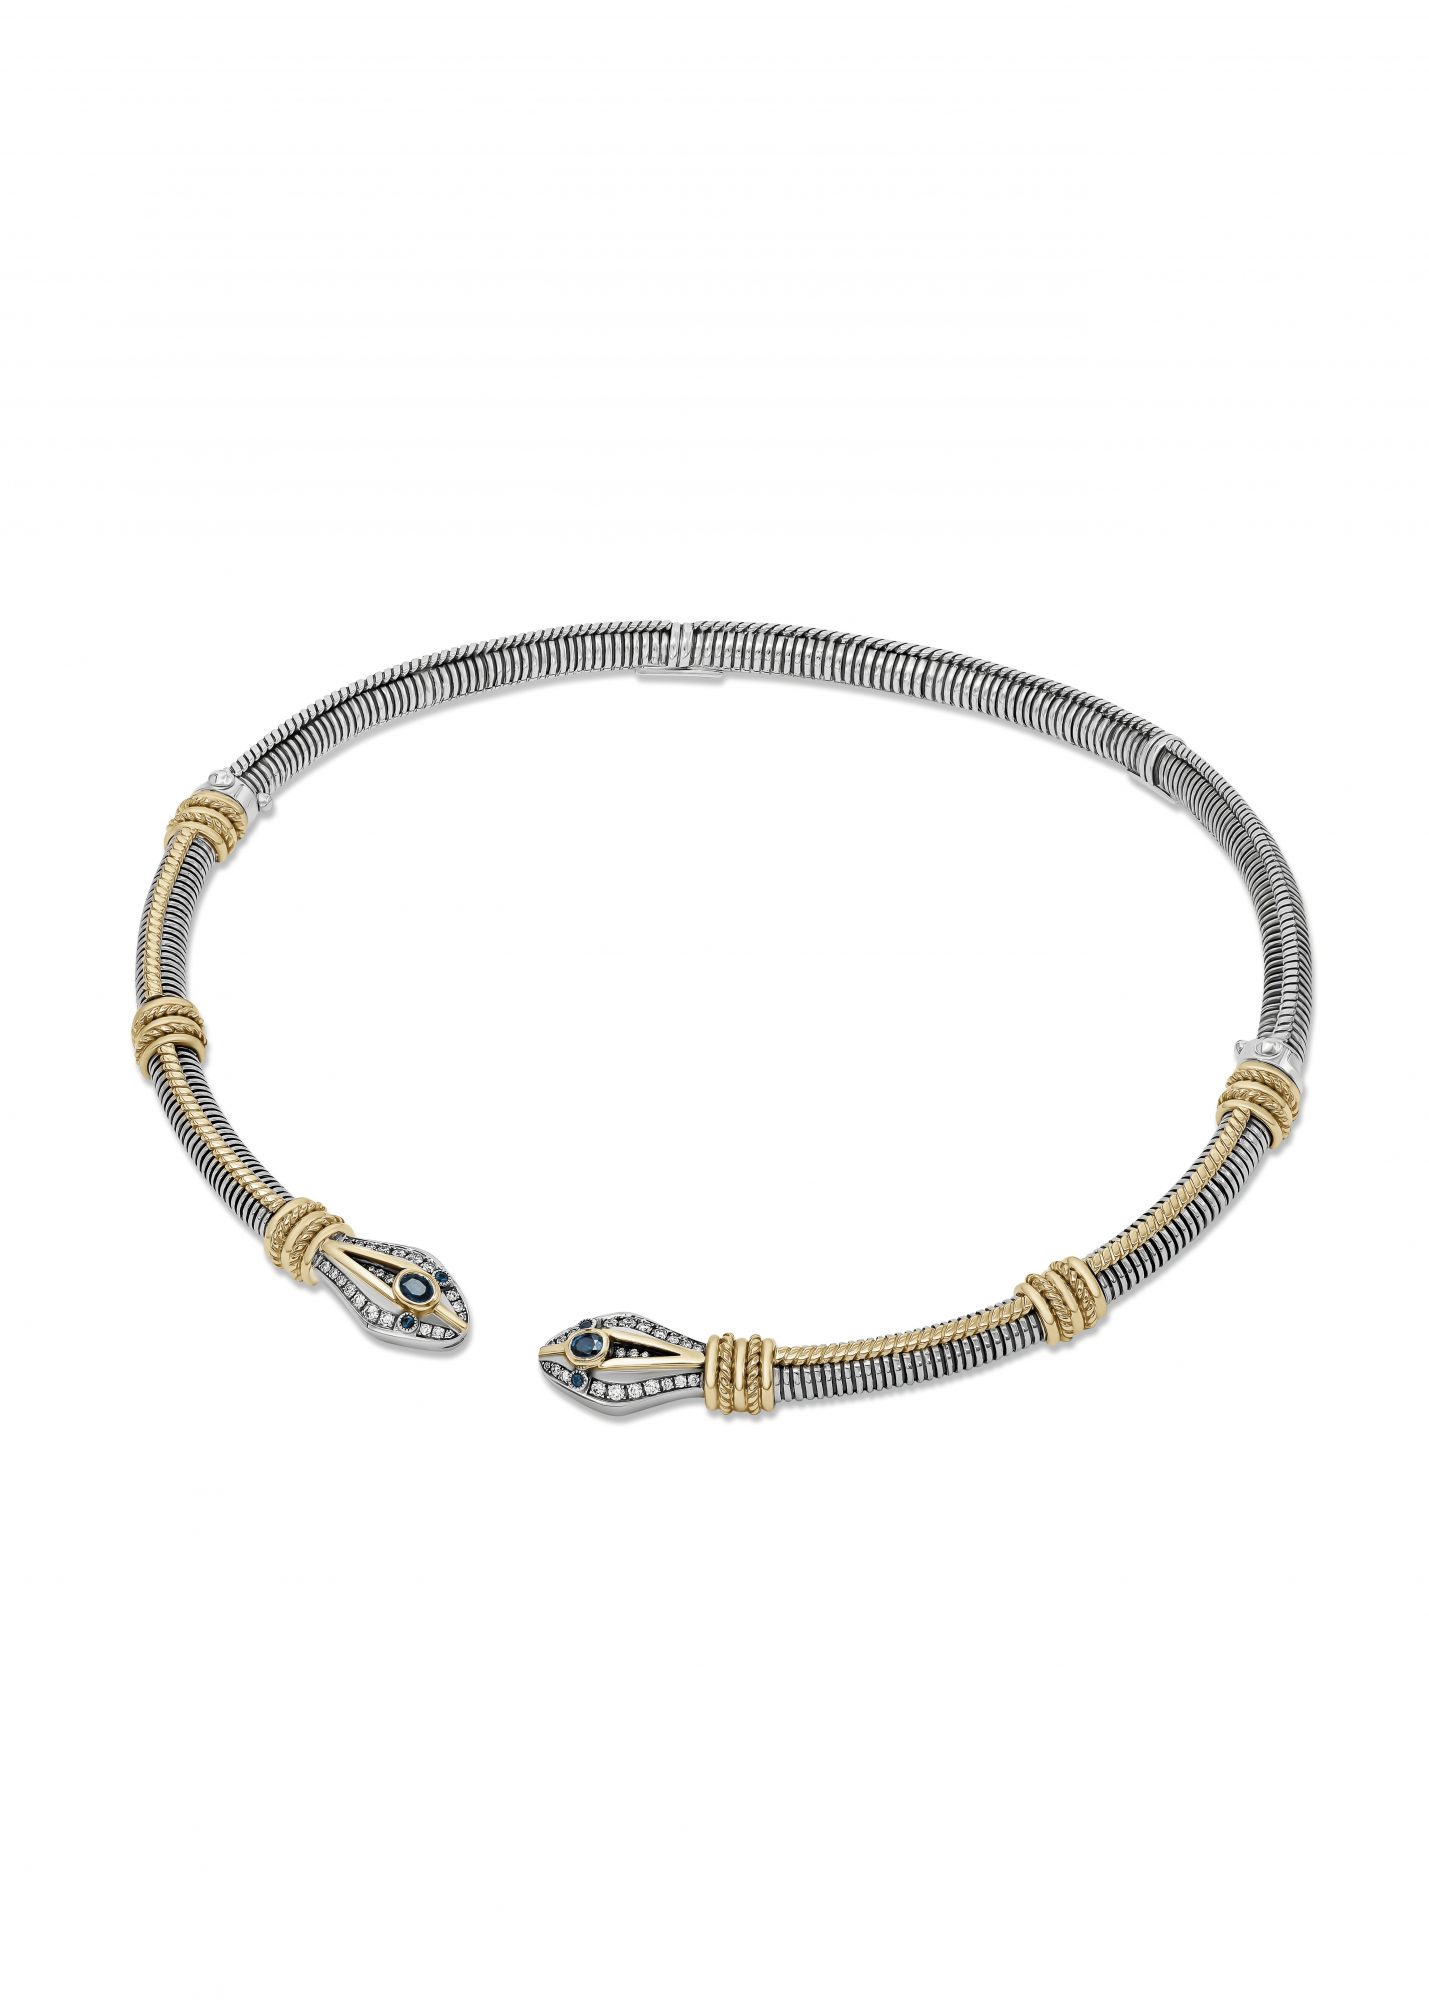 Azza Fahmy Jewellery Launches Egyptomania Capsule Collection in time for GFF